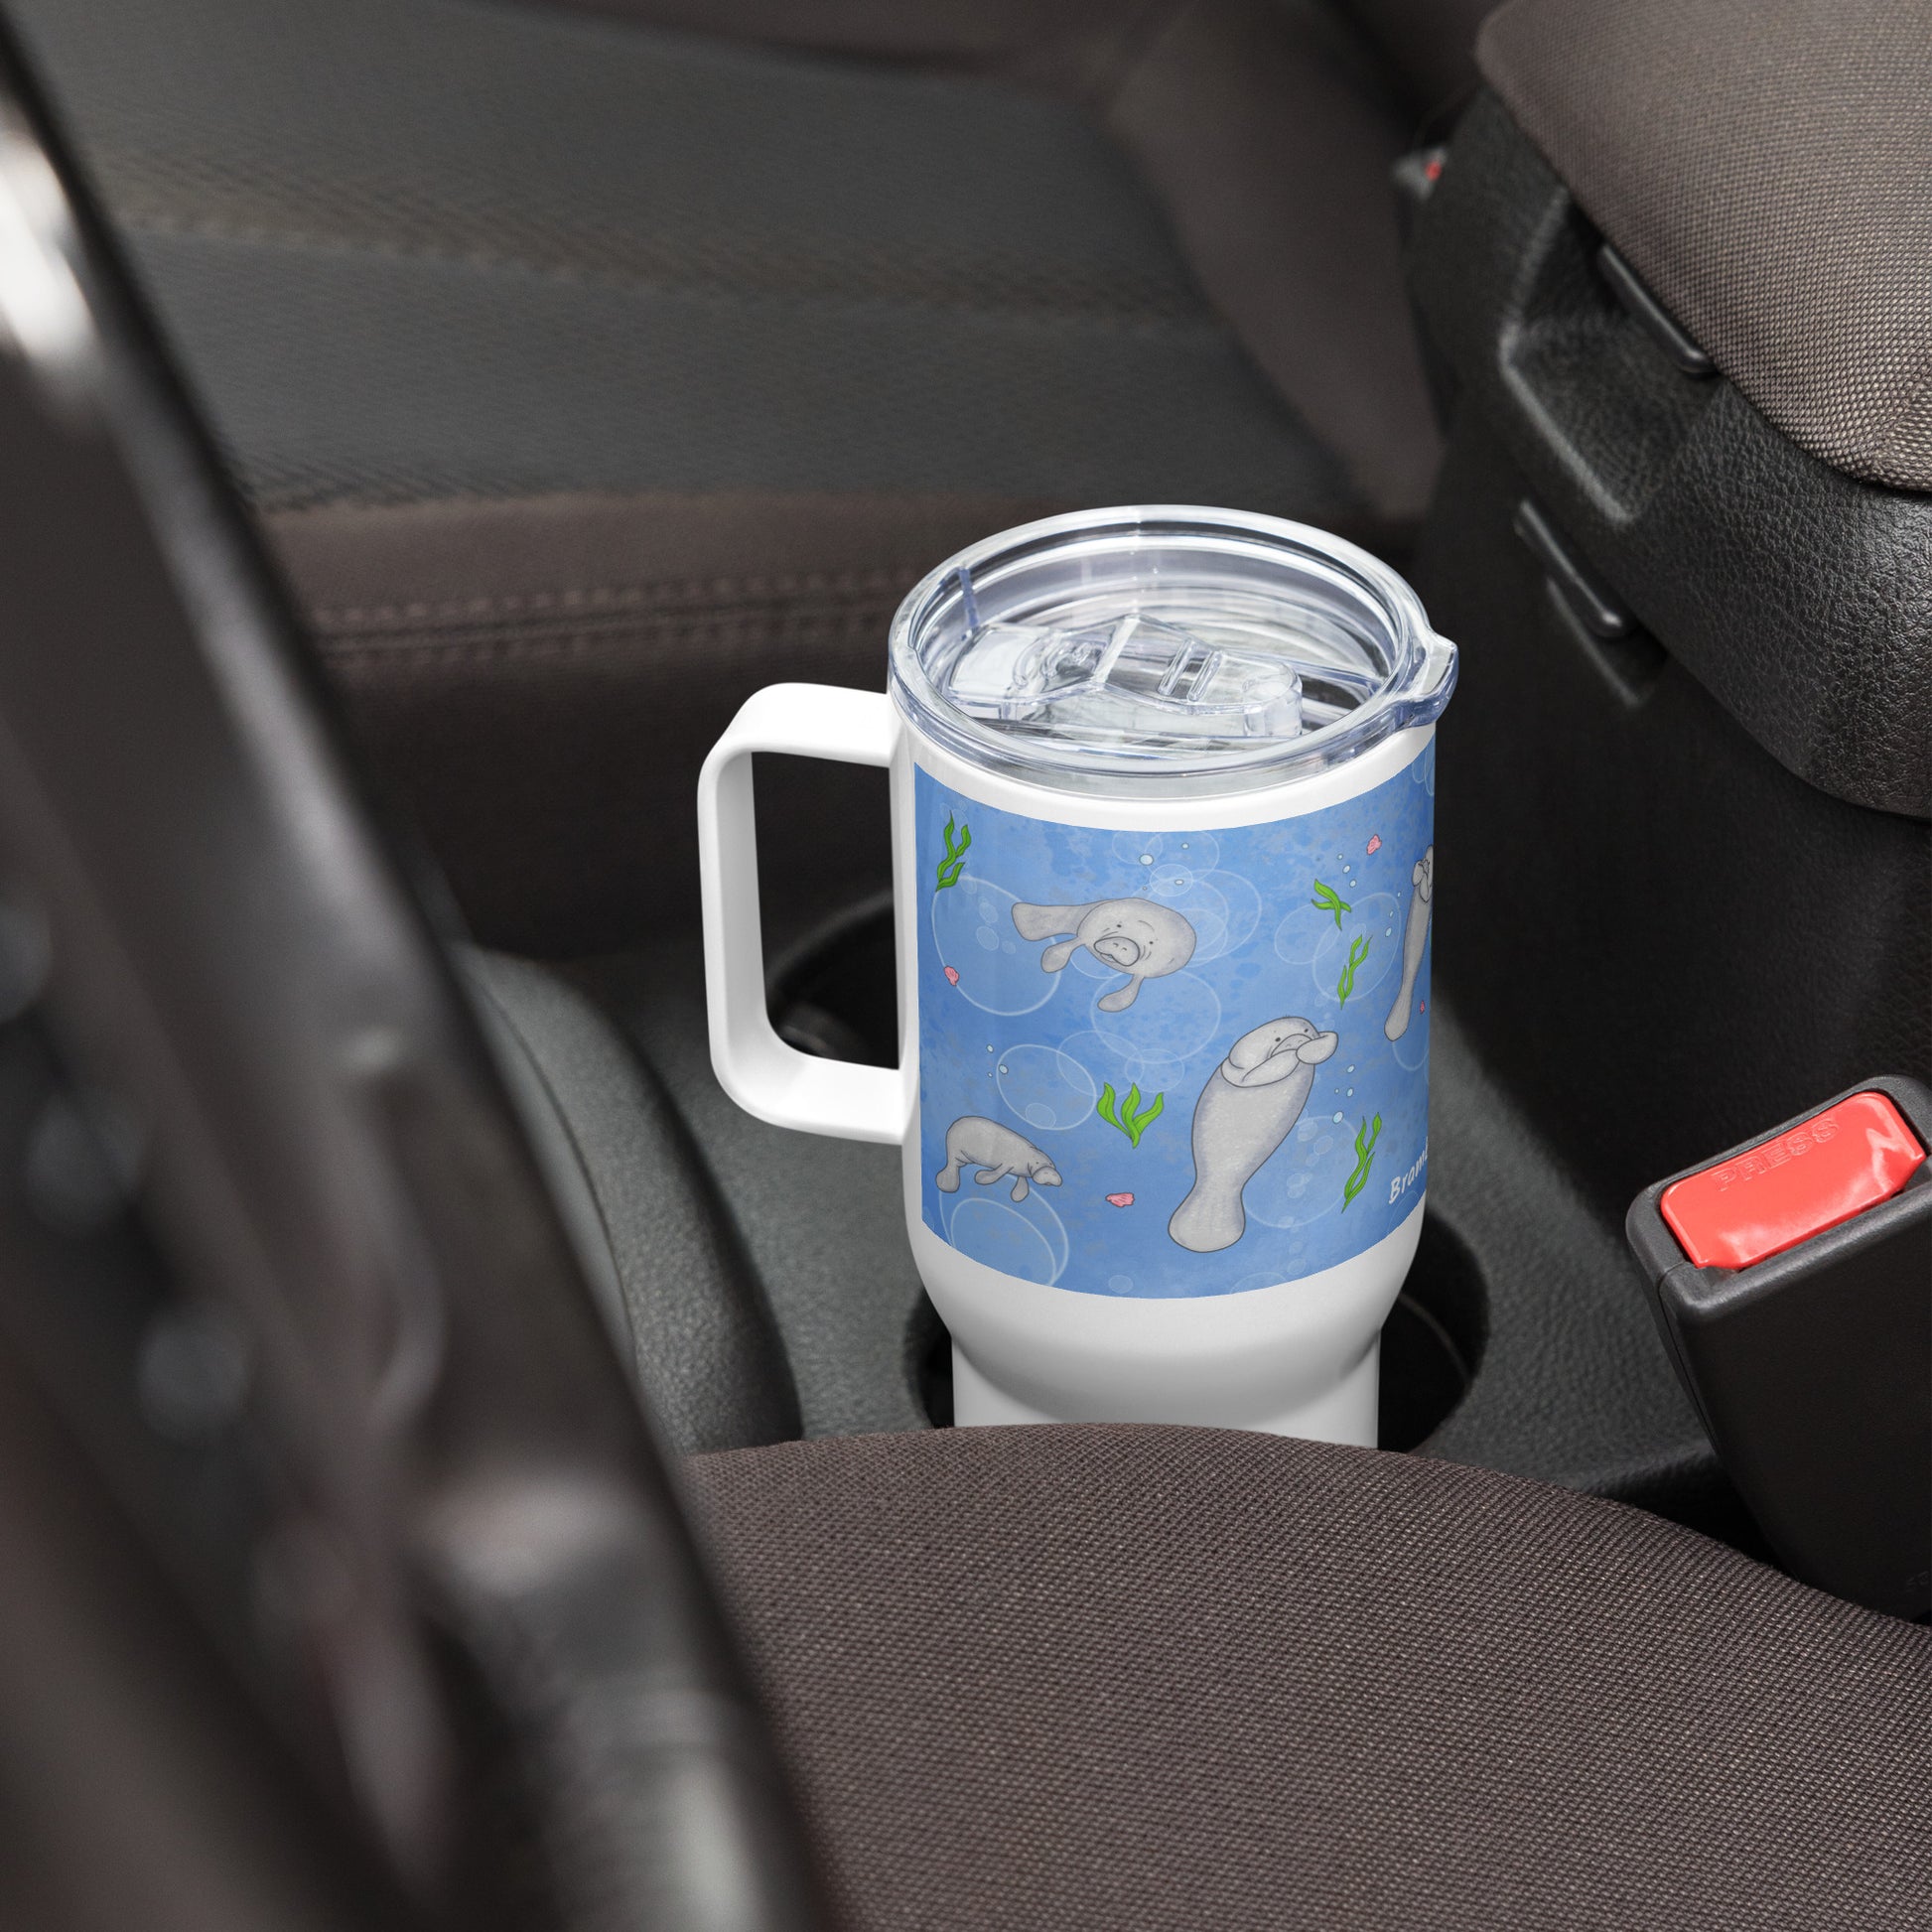 Stainless steel travel mug with handle. Holds 25 ounces of hot or cold drinks. Has wraparound illustrated manatees design. Fits most car cup holders. Comes with spill-proof BPA-free plastic lid. Shown in car cup holder with handle facing left.